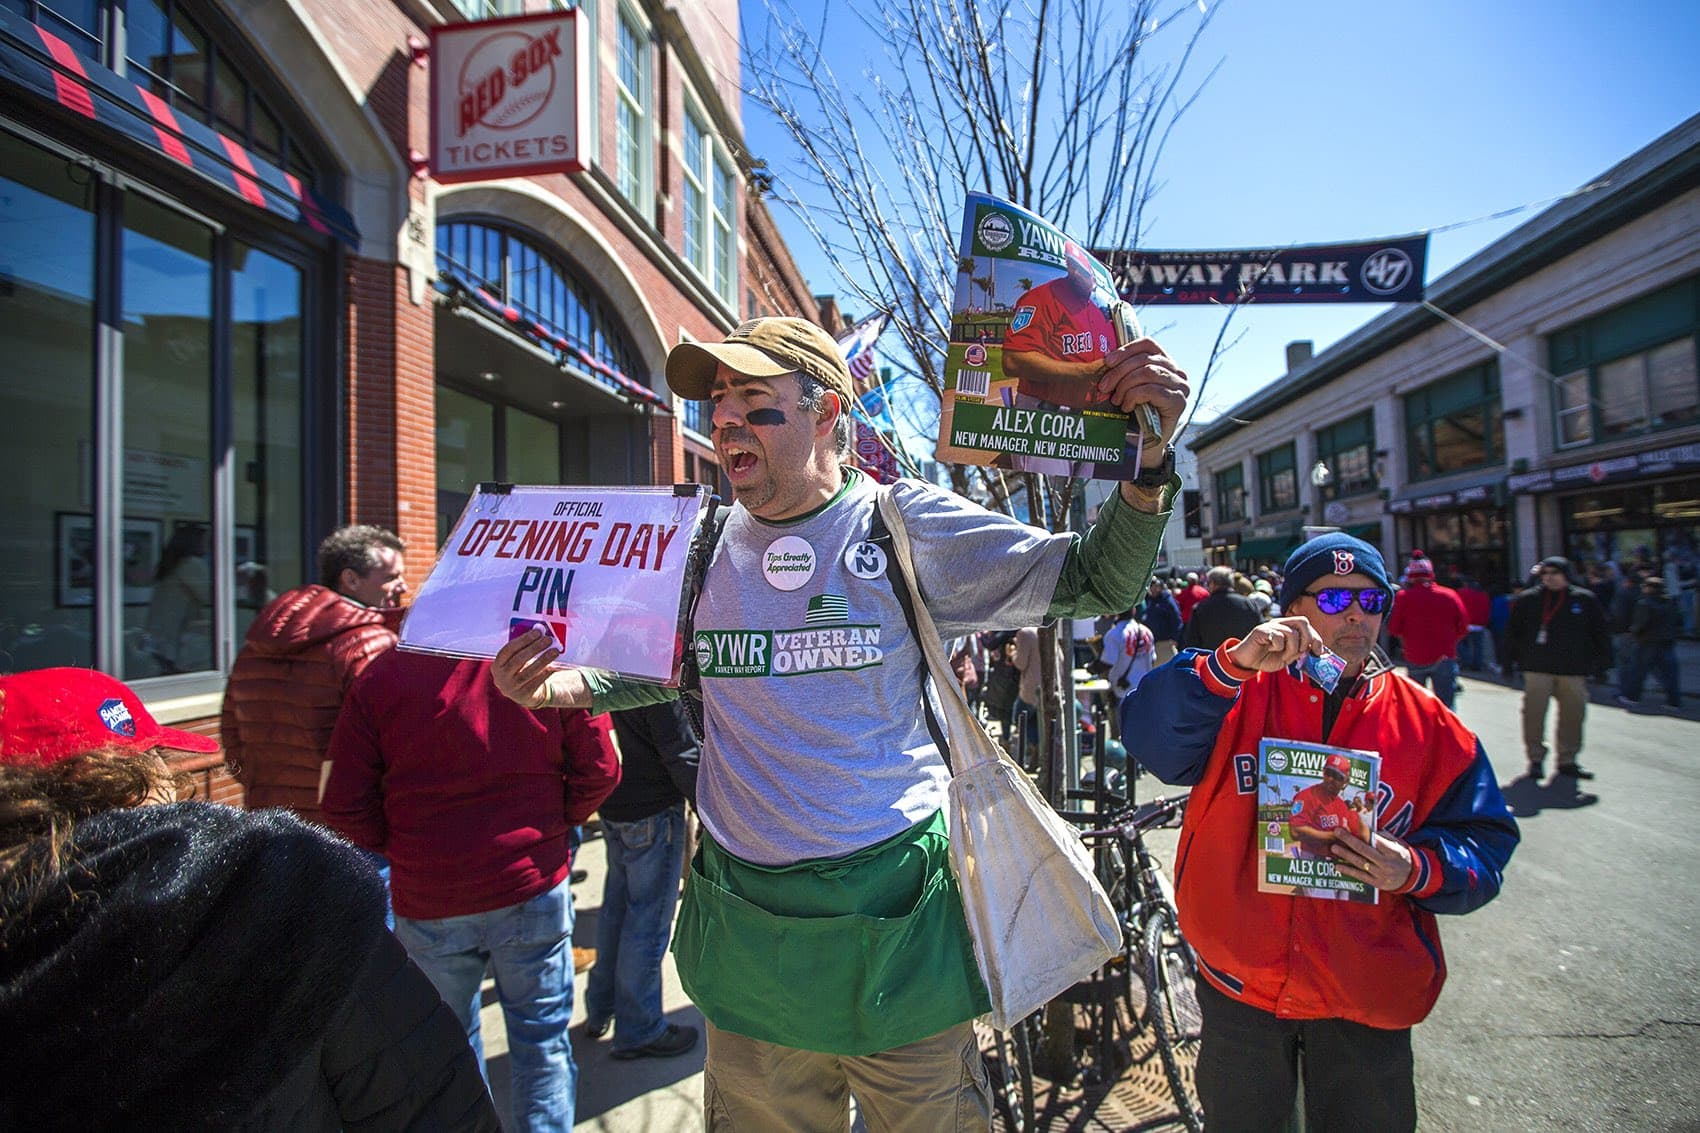 Red Sox fans look to an Opening Day like no other